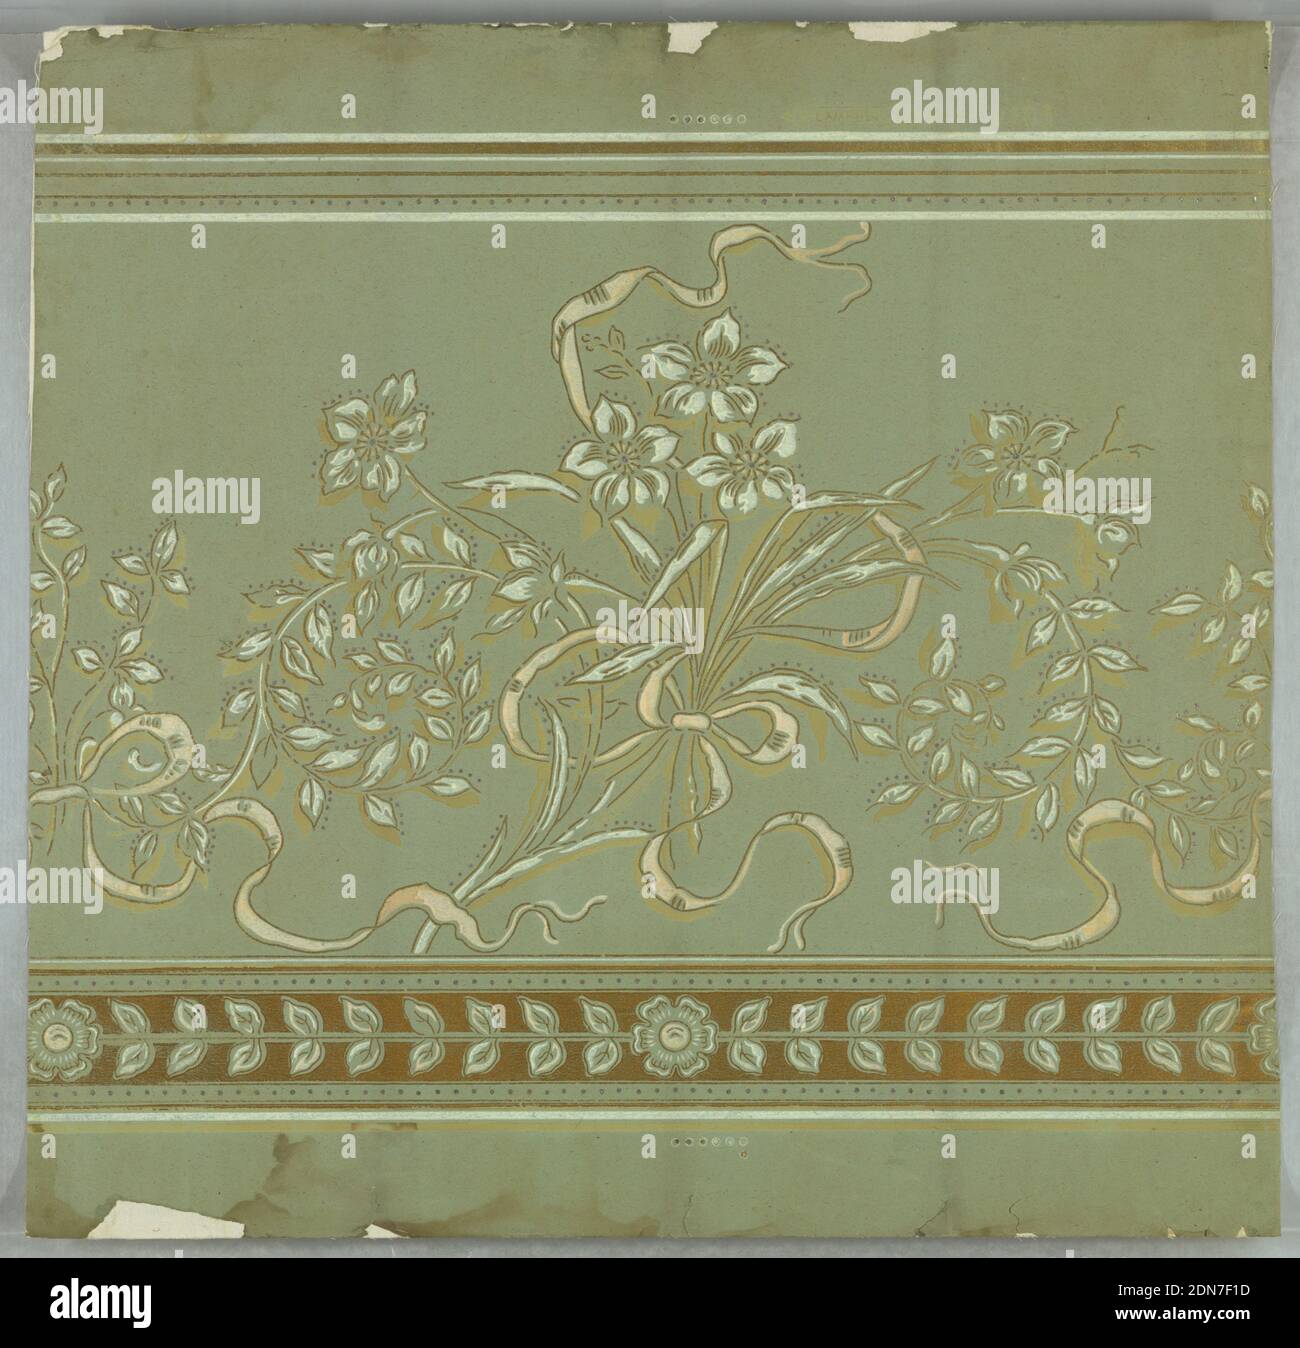 Frieze, Machine-printed, ingrain paper, mica, Wide frieze containing white and gold flowers tied with white ribbon, gold and white stylized floral and leaf banding at bottom, printed on pale green ground., USA, 1890–1900, Wallcoverings, Frieze Stock Photo